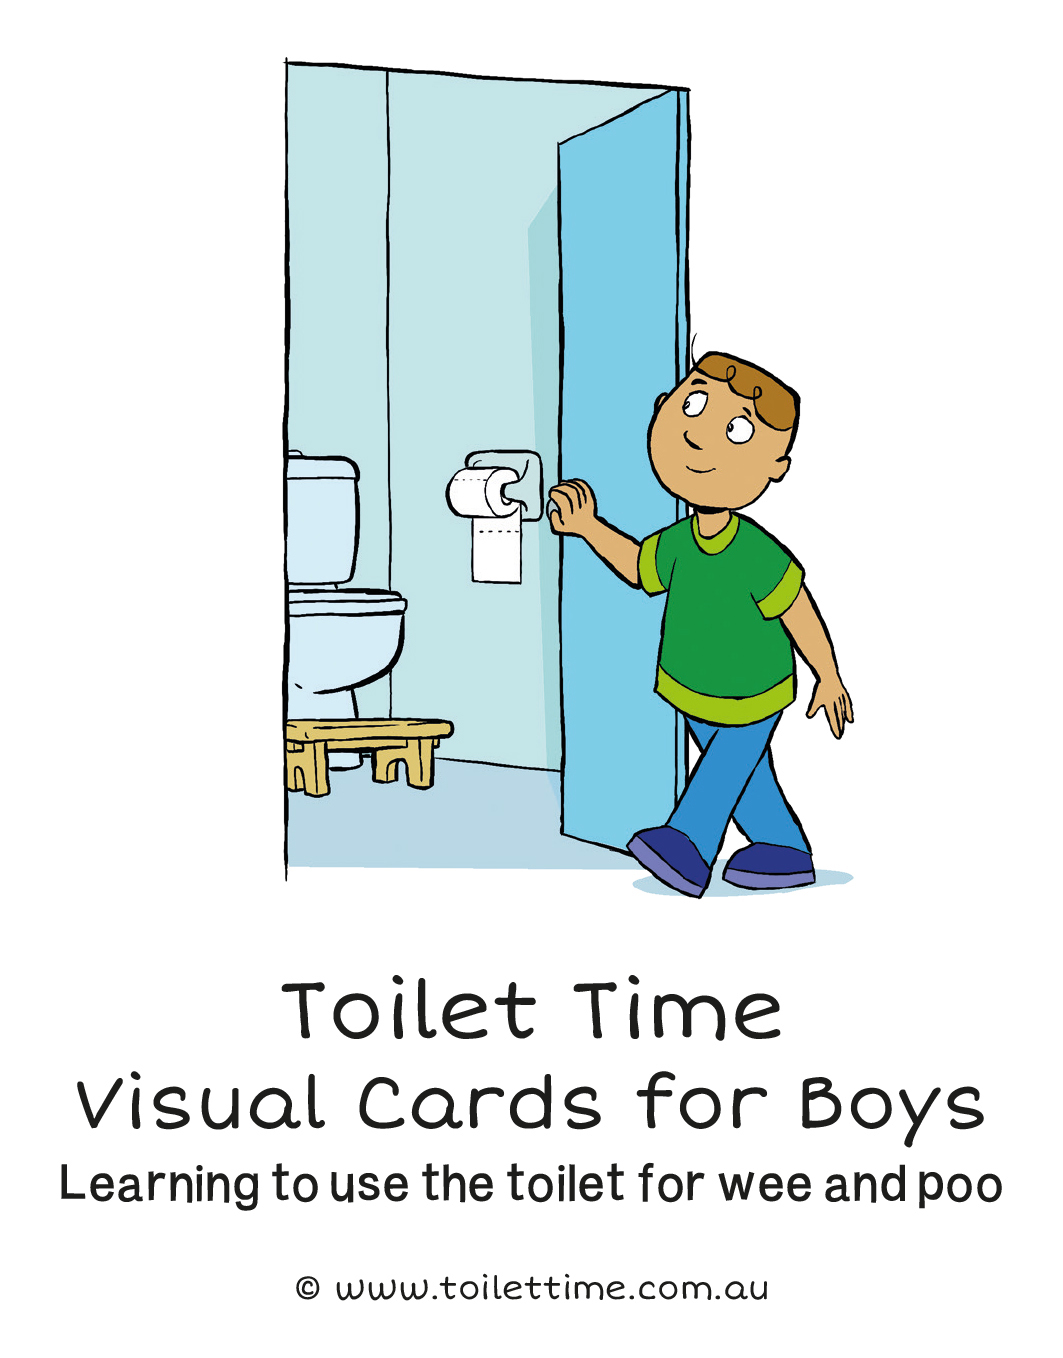 Toilet Time: Visual cards for boys learning to use the toilet for wee and poo